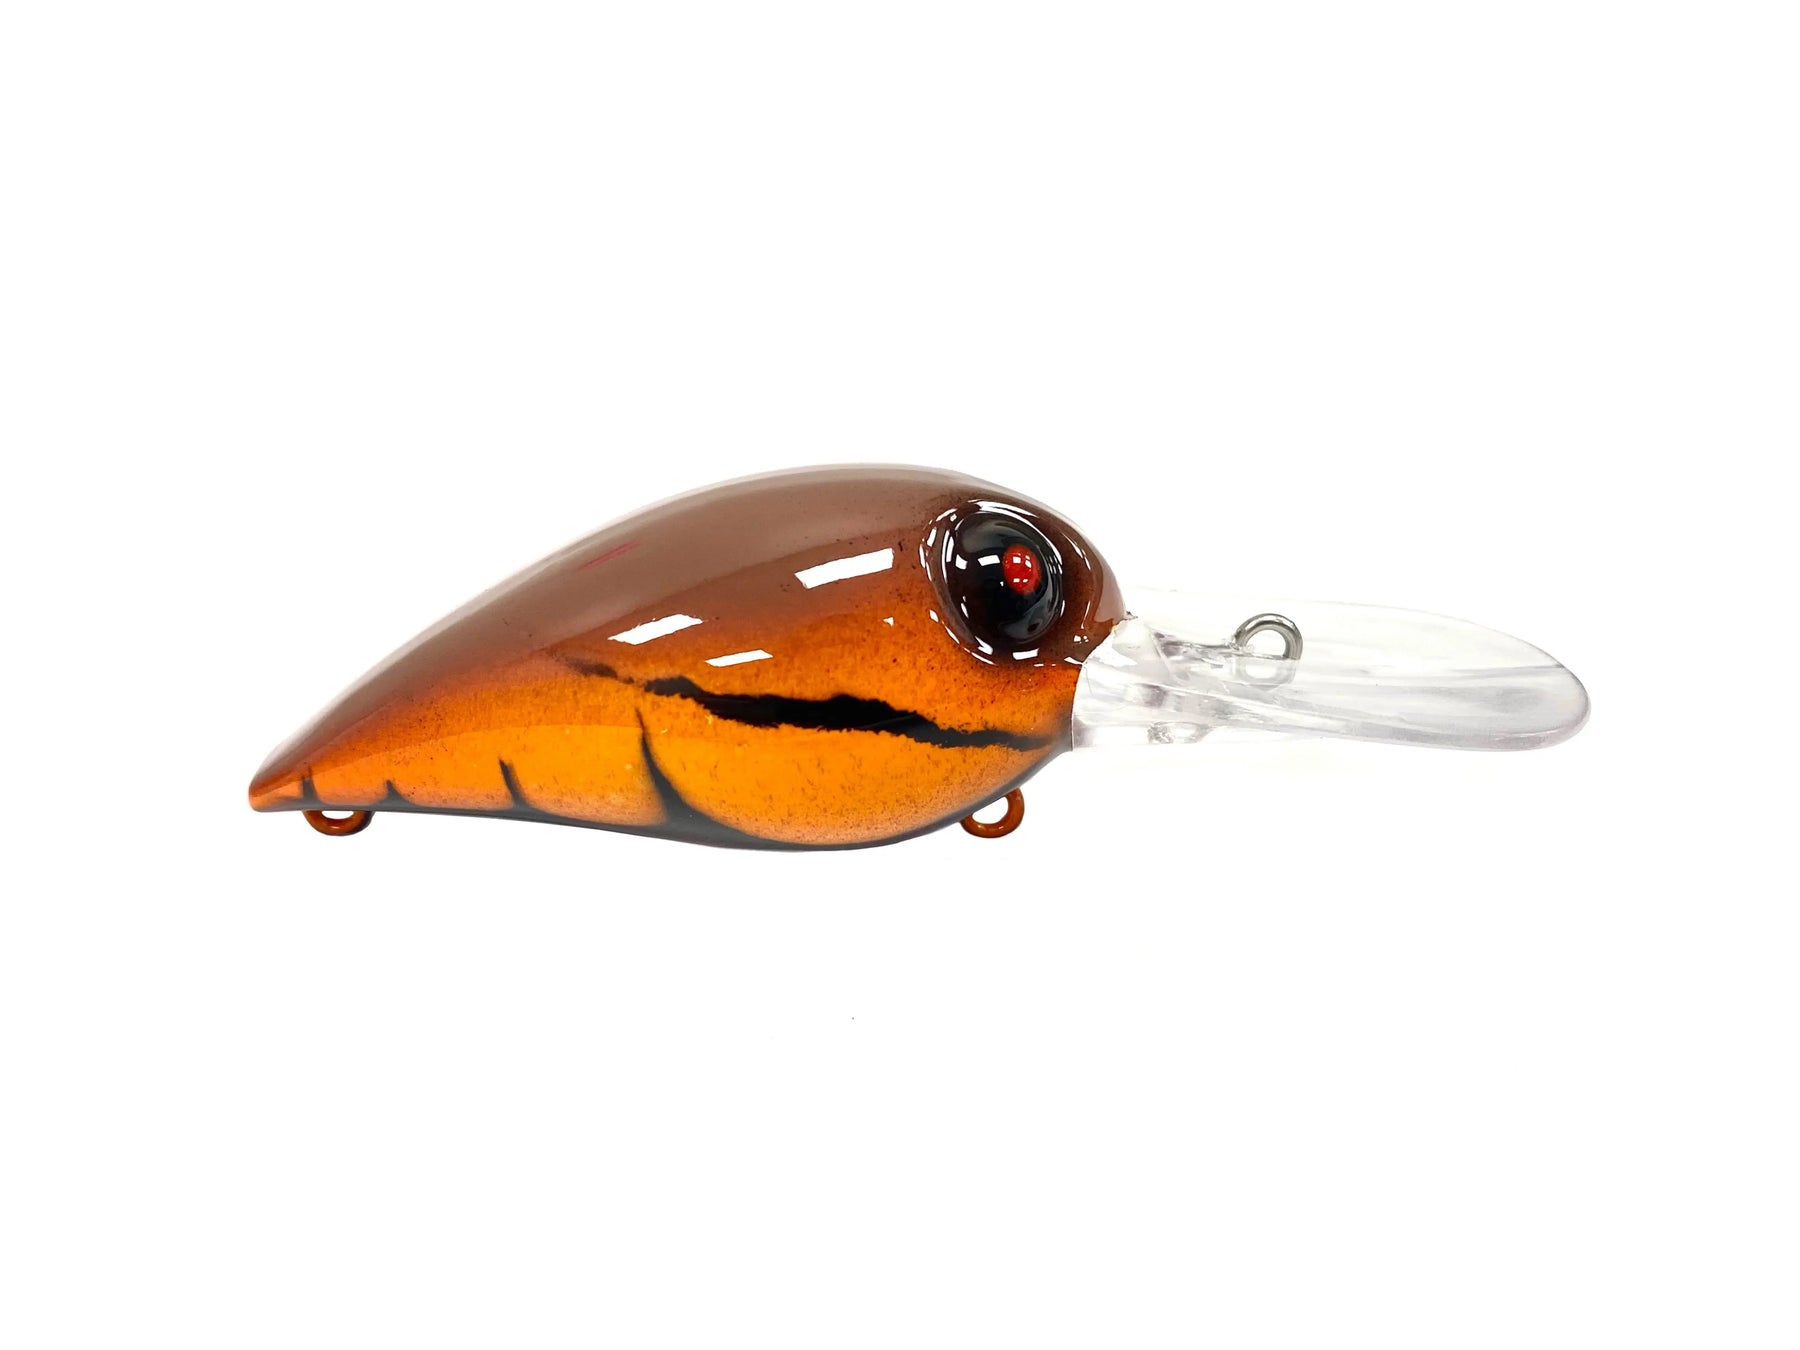 Crackle paint - LURELOVERS Australian Fishing Lure Community - Page 1